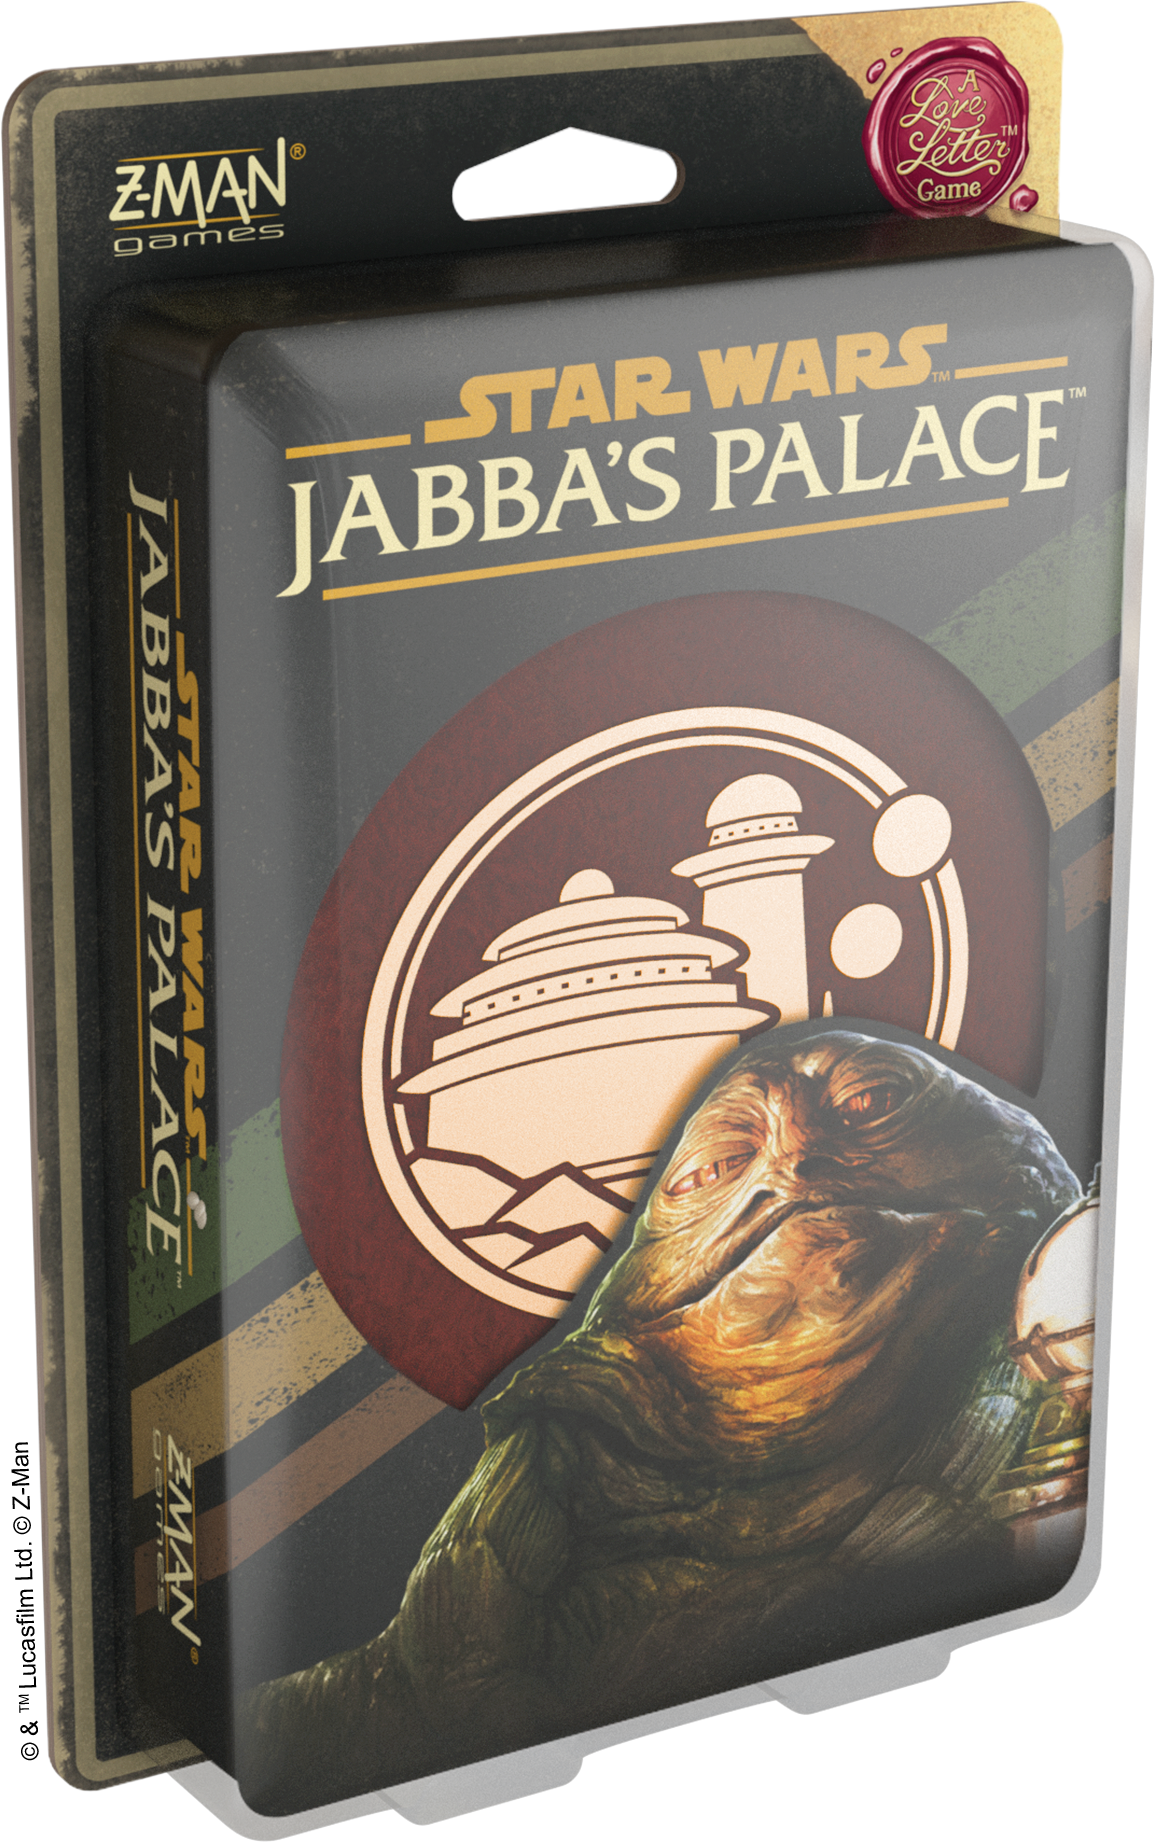 Star Wars Jabbas Palace - A Love Letter Game (T.O.S.) -  Z Man Games